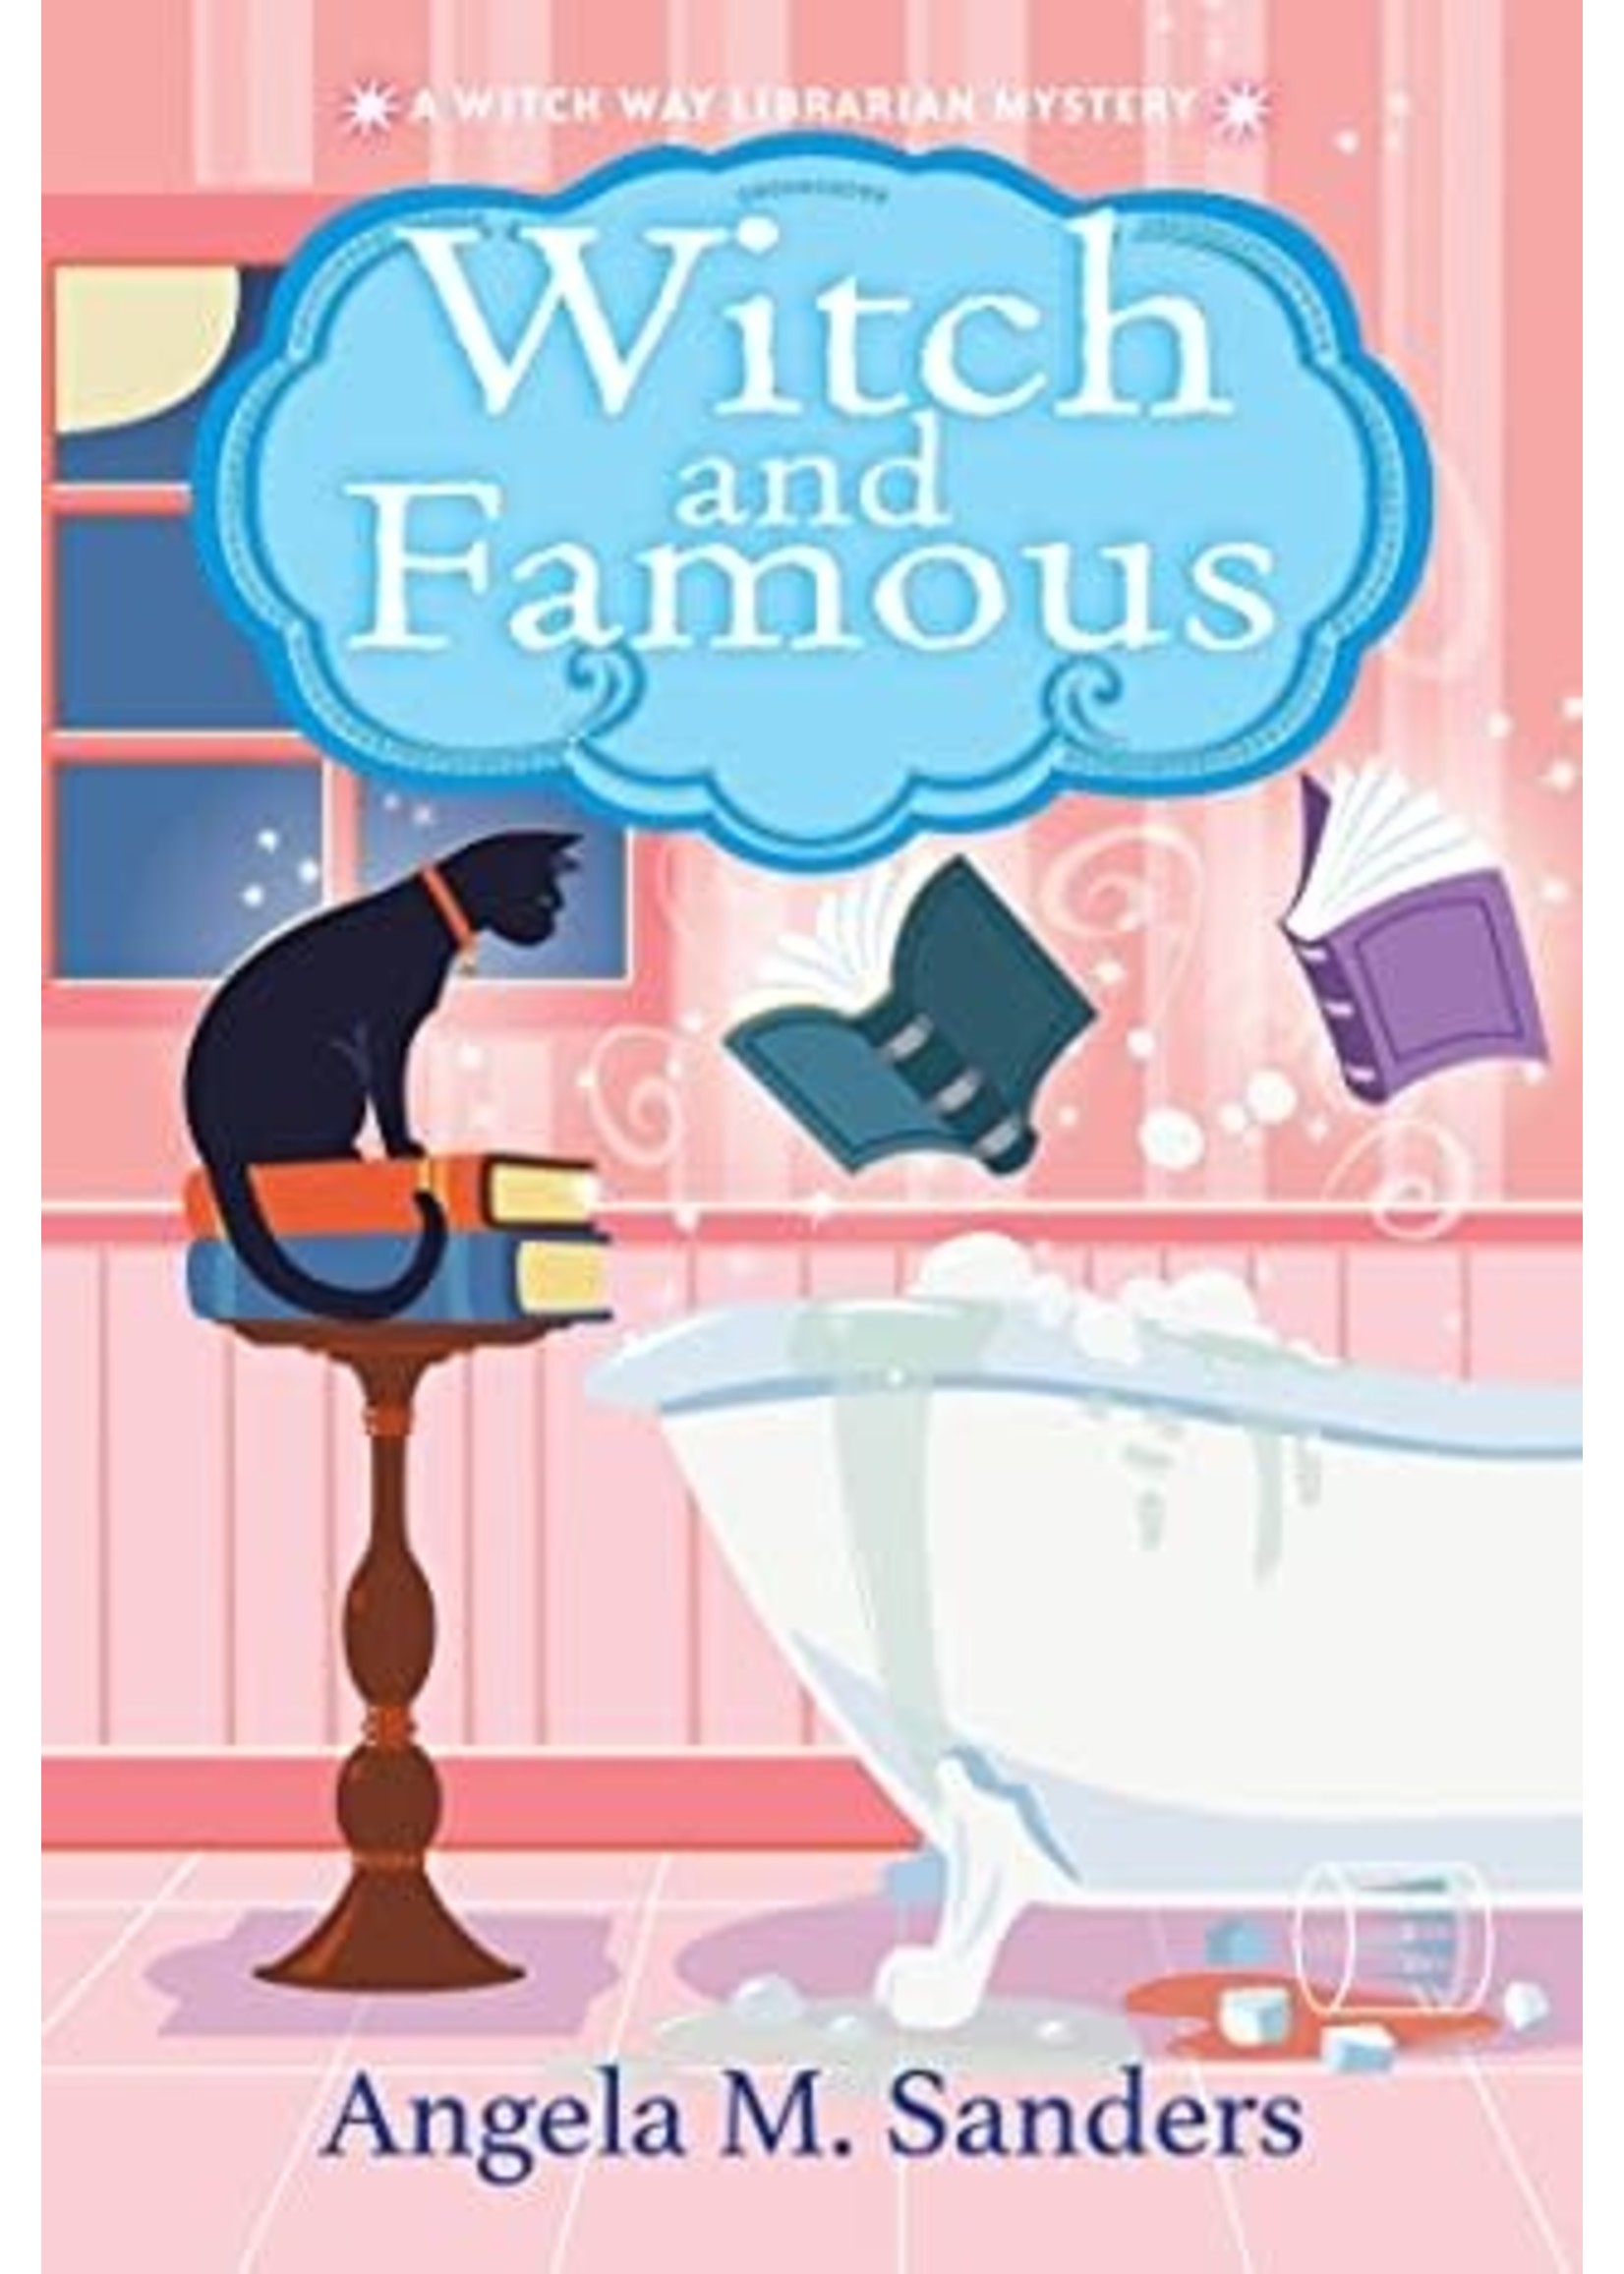 Witch and Famous (Witch Way Librarian Mysteries #3) by Angela M. Sanders